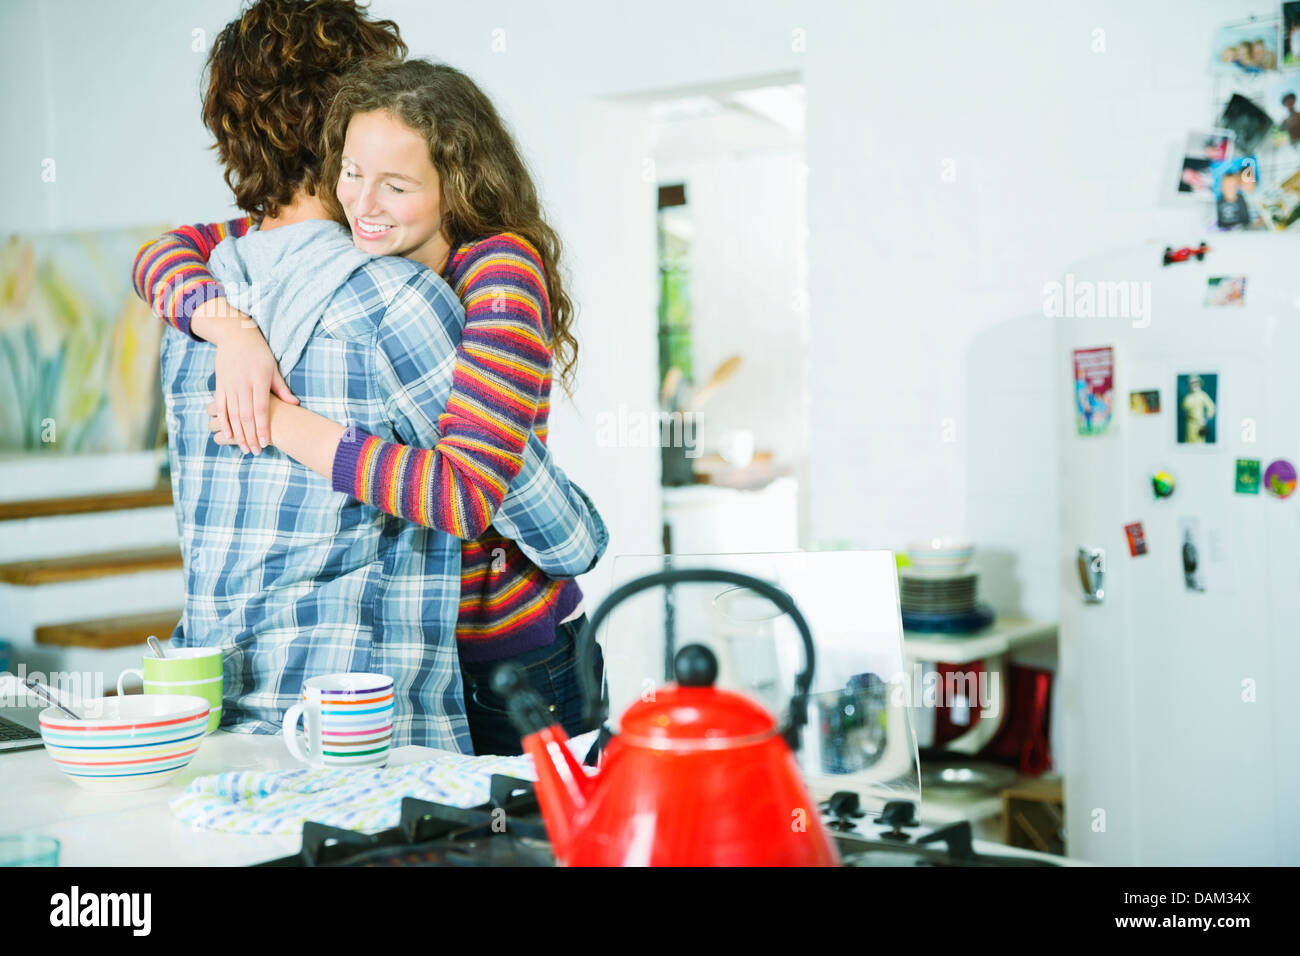 Couple hugging in kitchen Banque D'Images